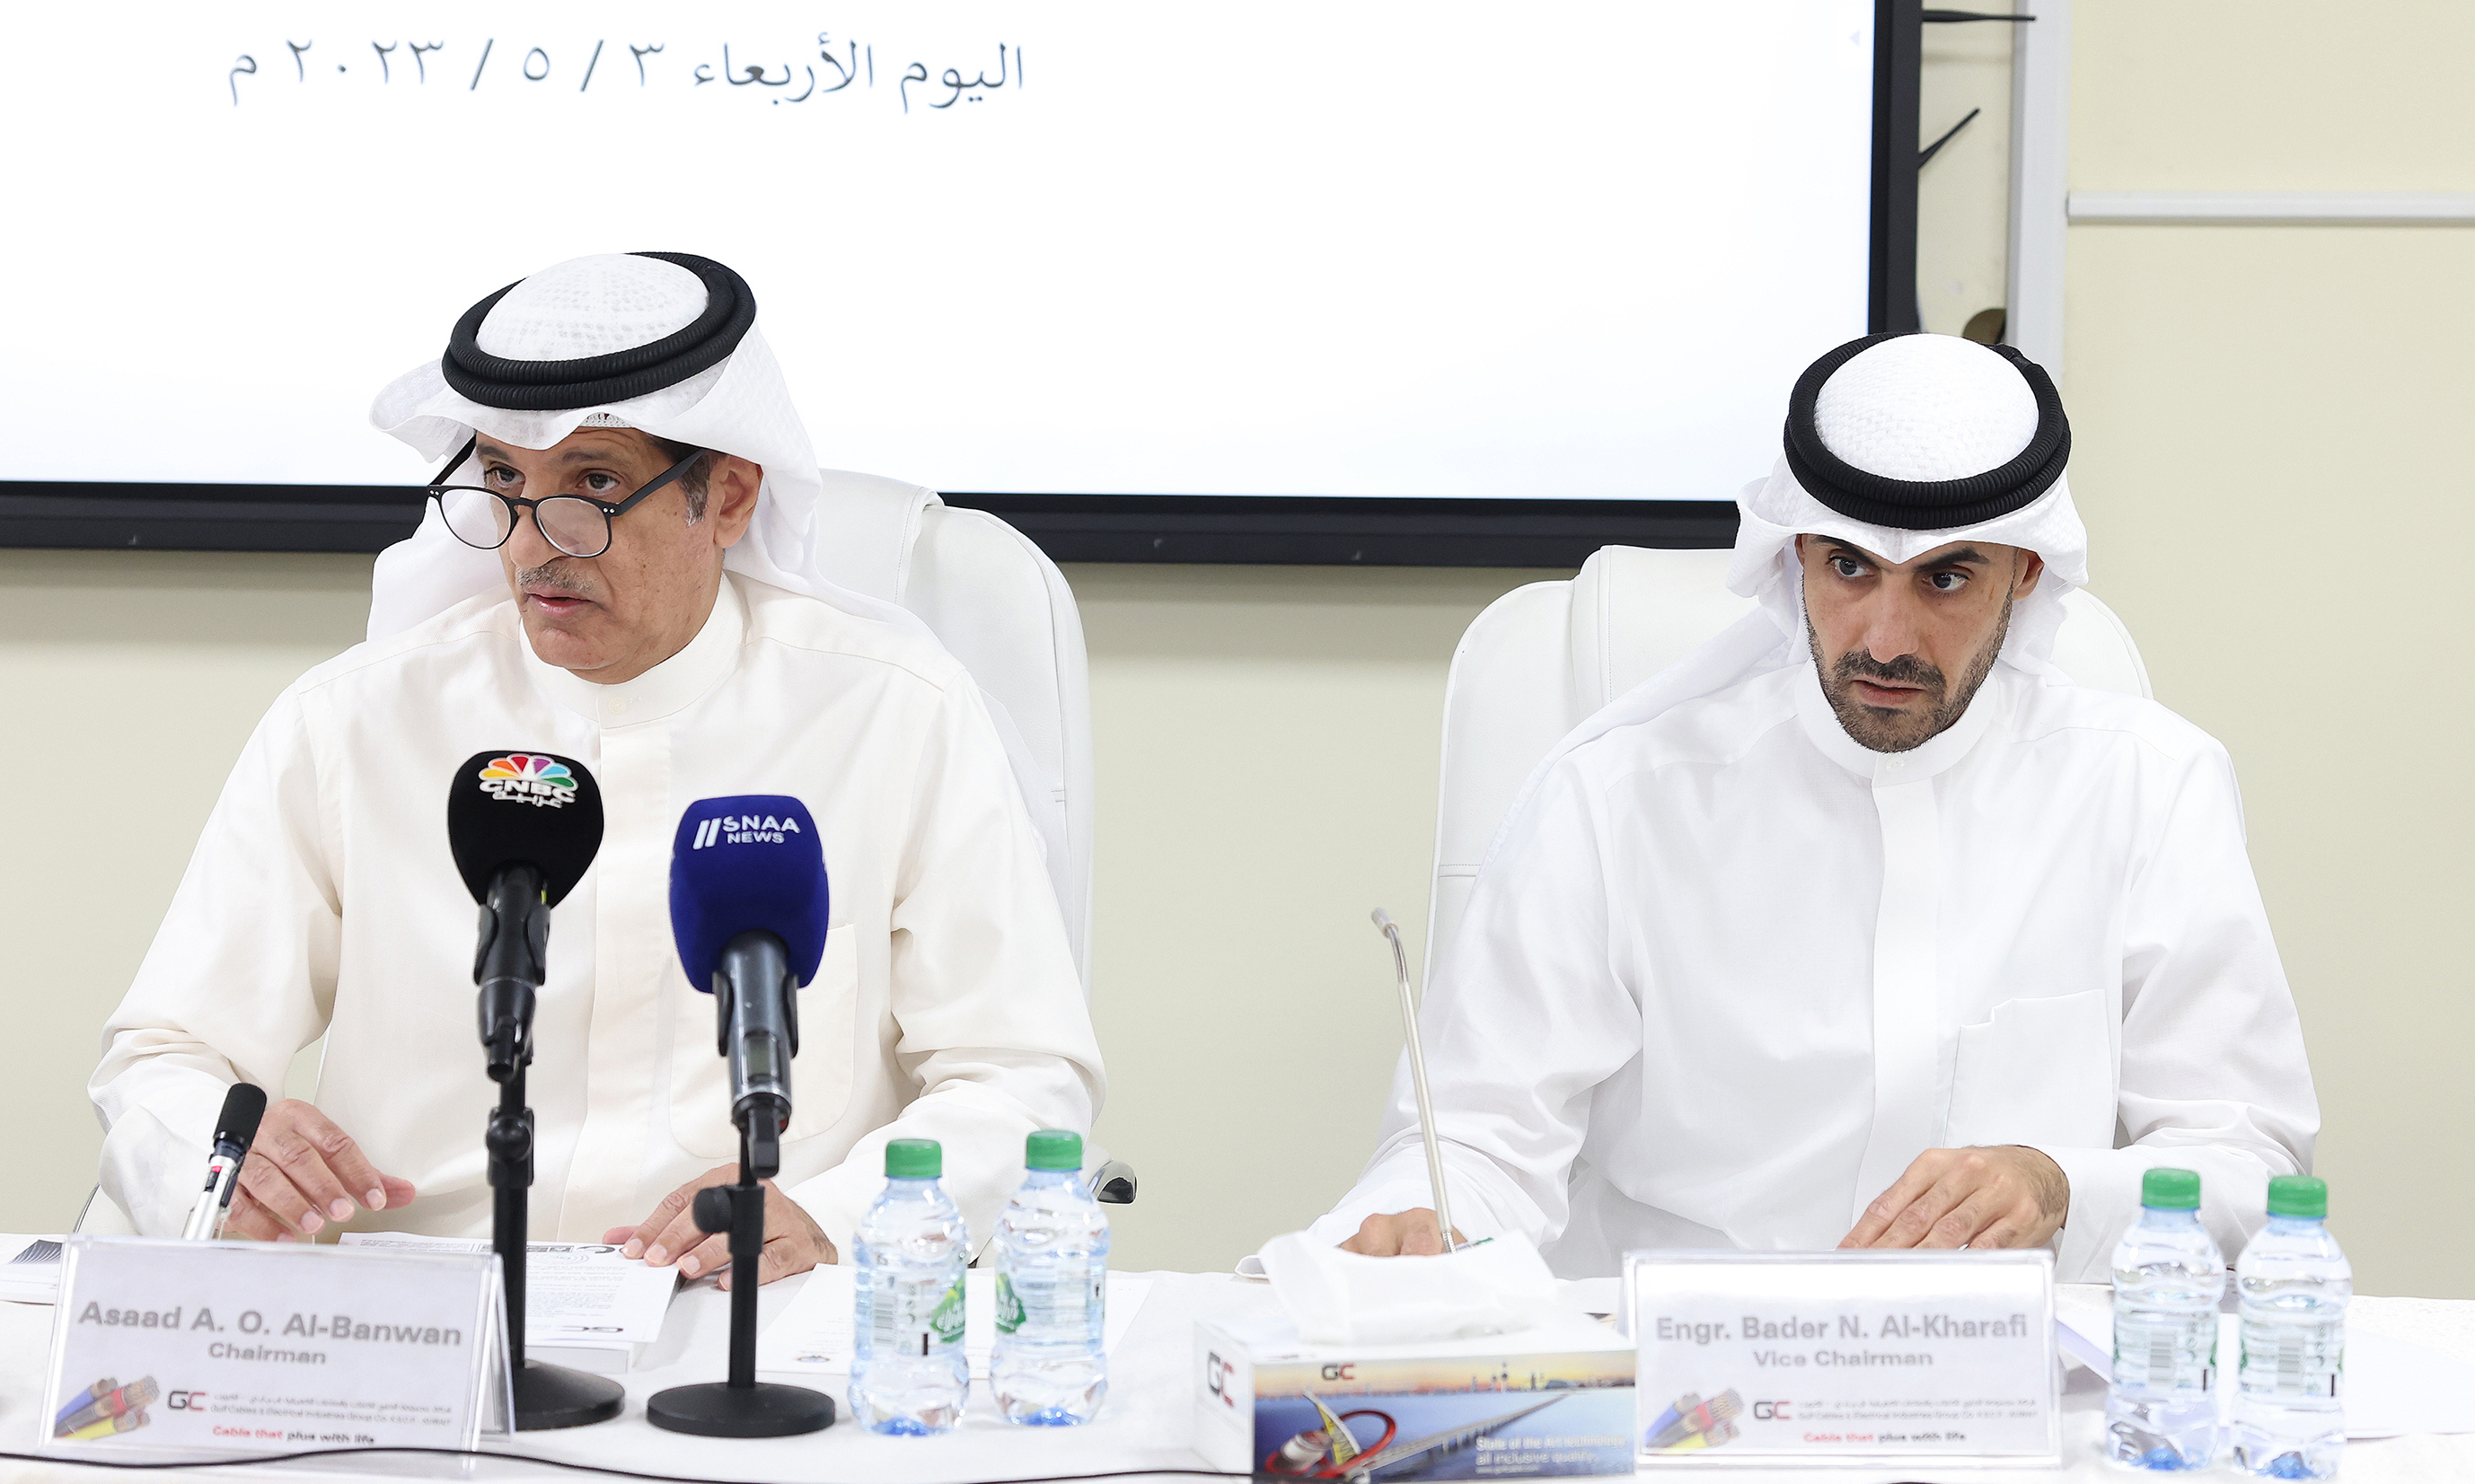 KUWAIT: Chairman of the board of directors of Gulf Cables Asaad Al-Banwan (left)  and Vice Chairman Eng Bader Nasser Al-Kharafi during the general assembly meeting.